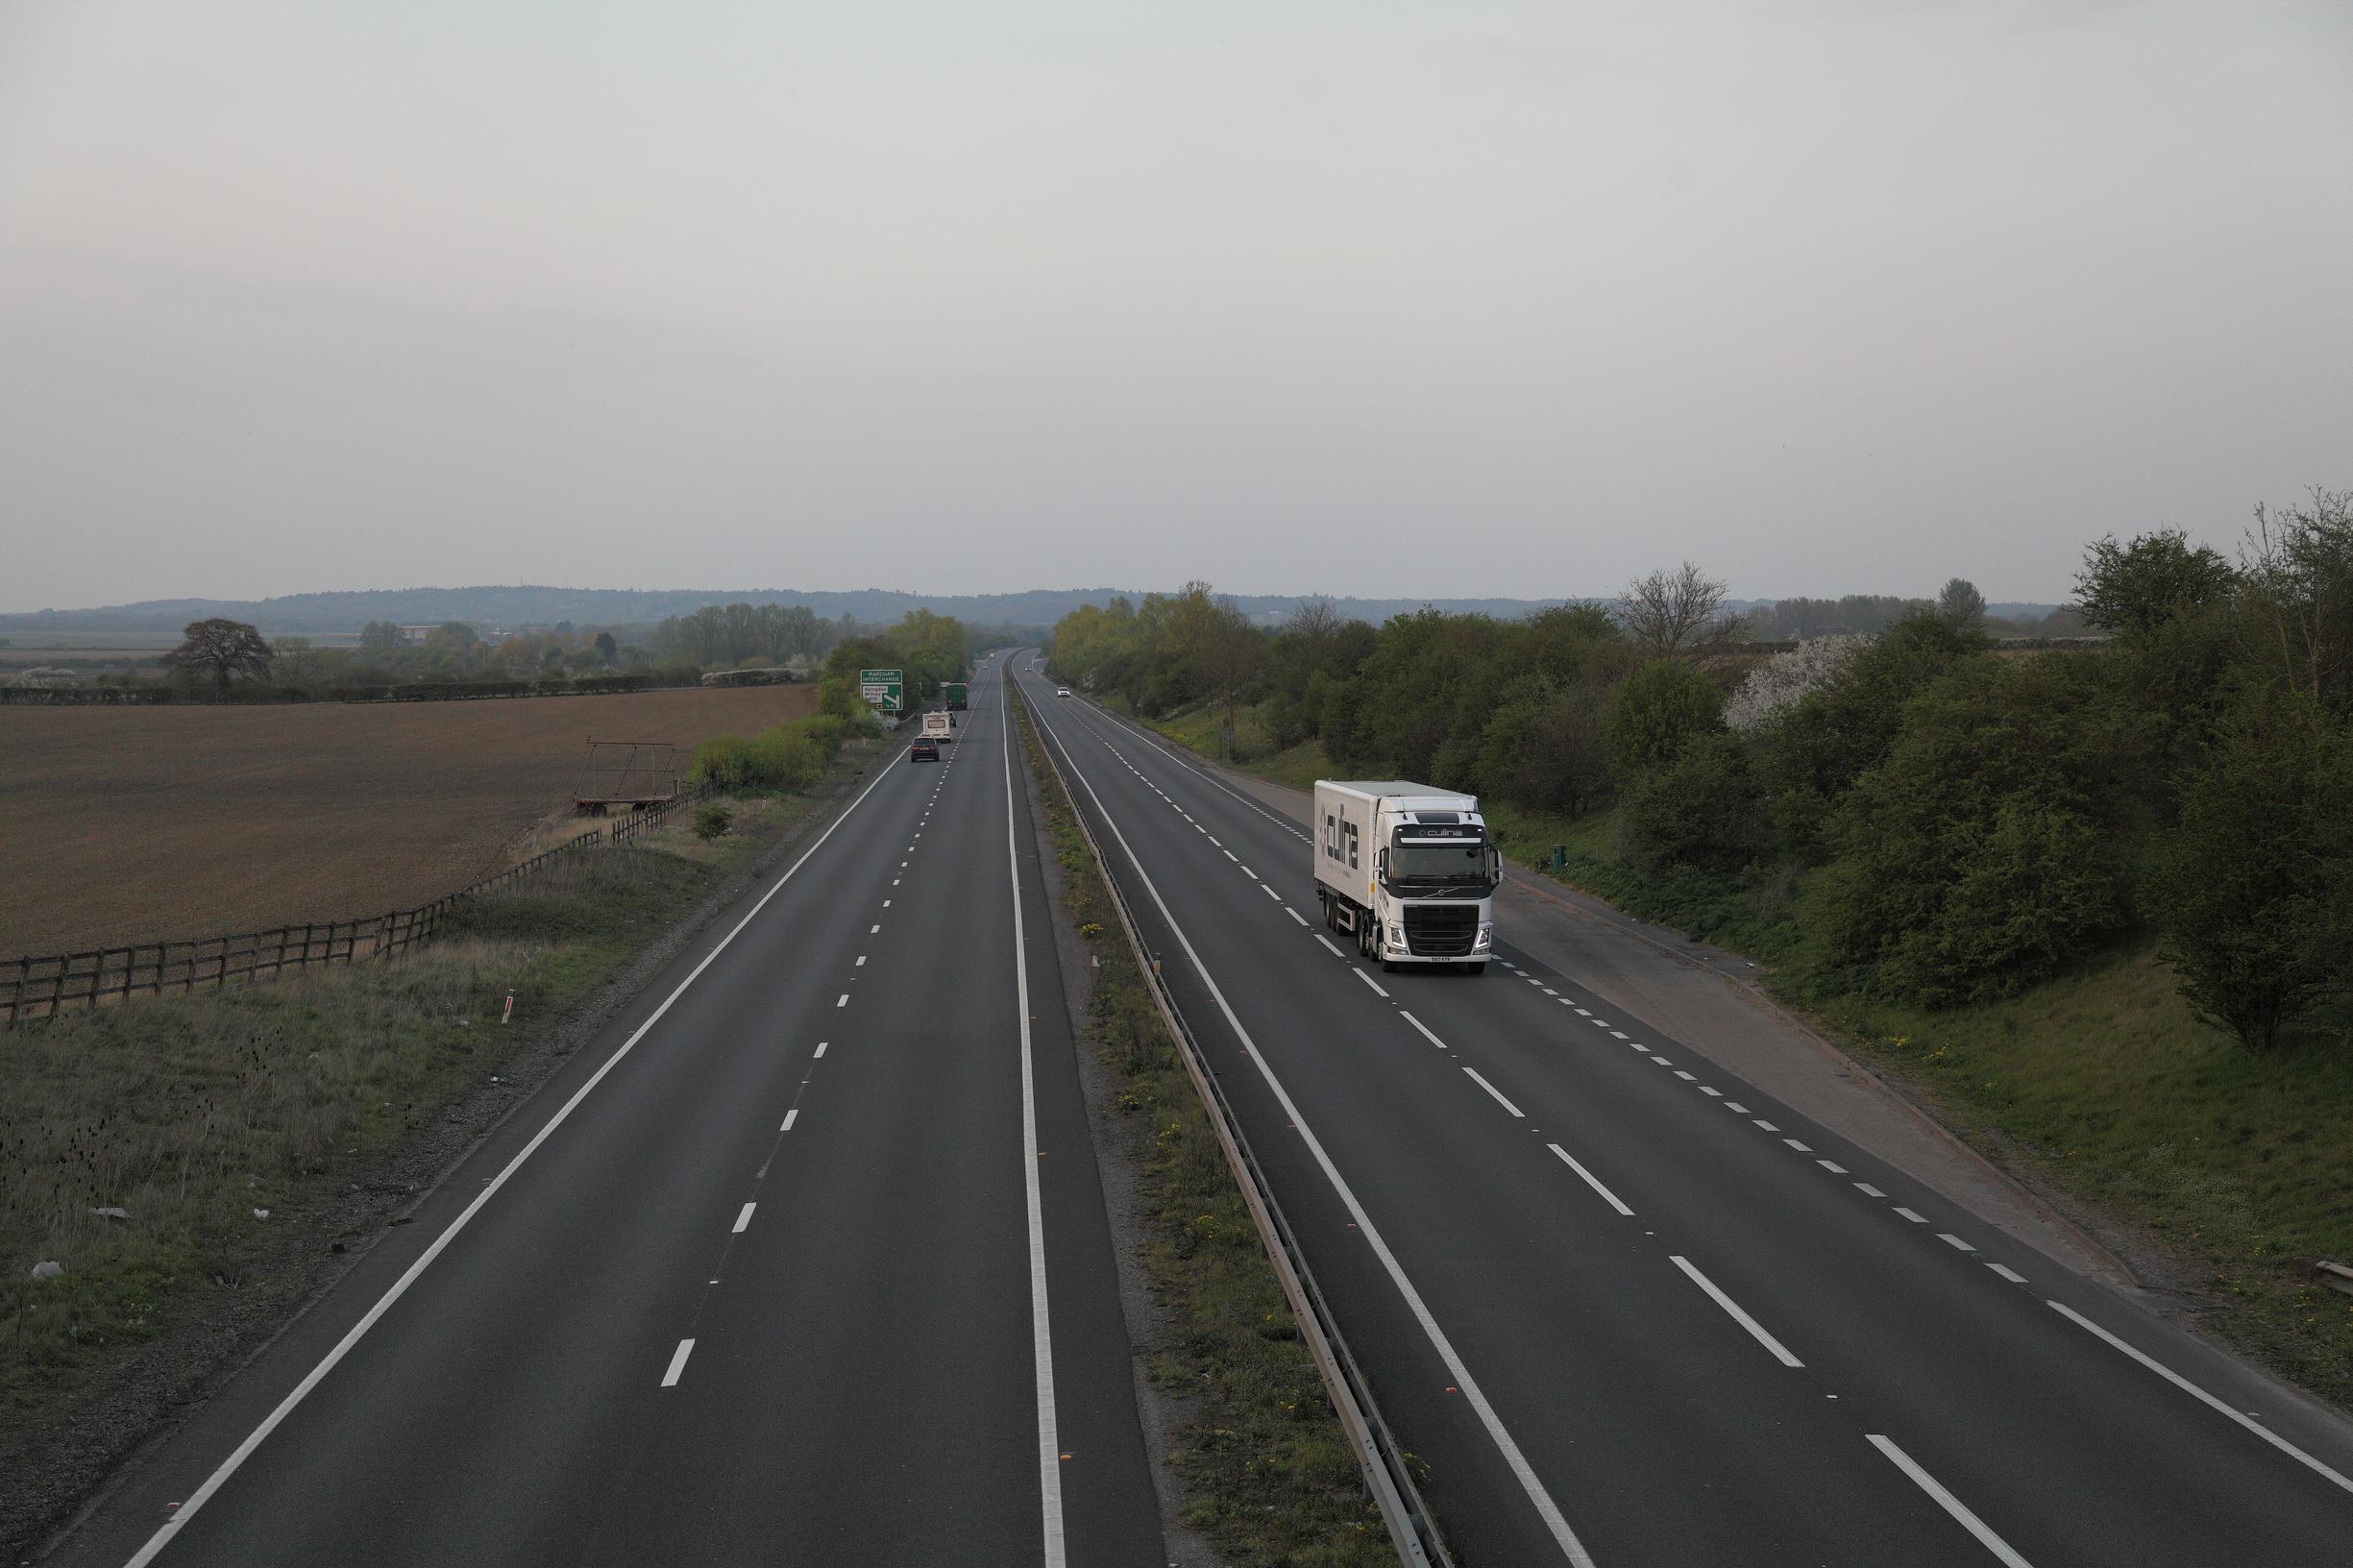 The almost empty A34 trunk road in Oxfordshire